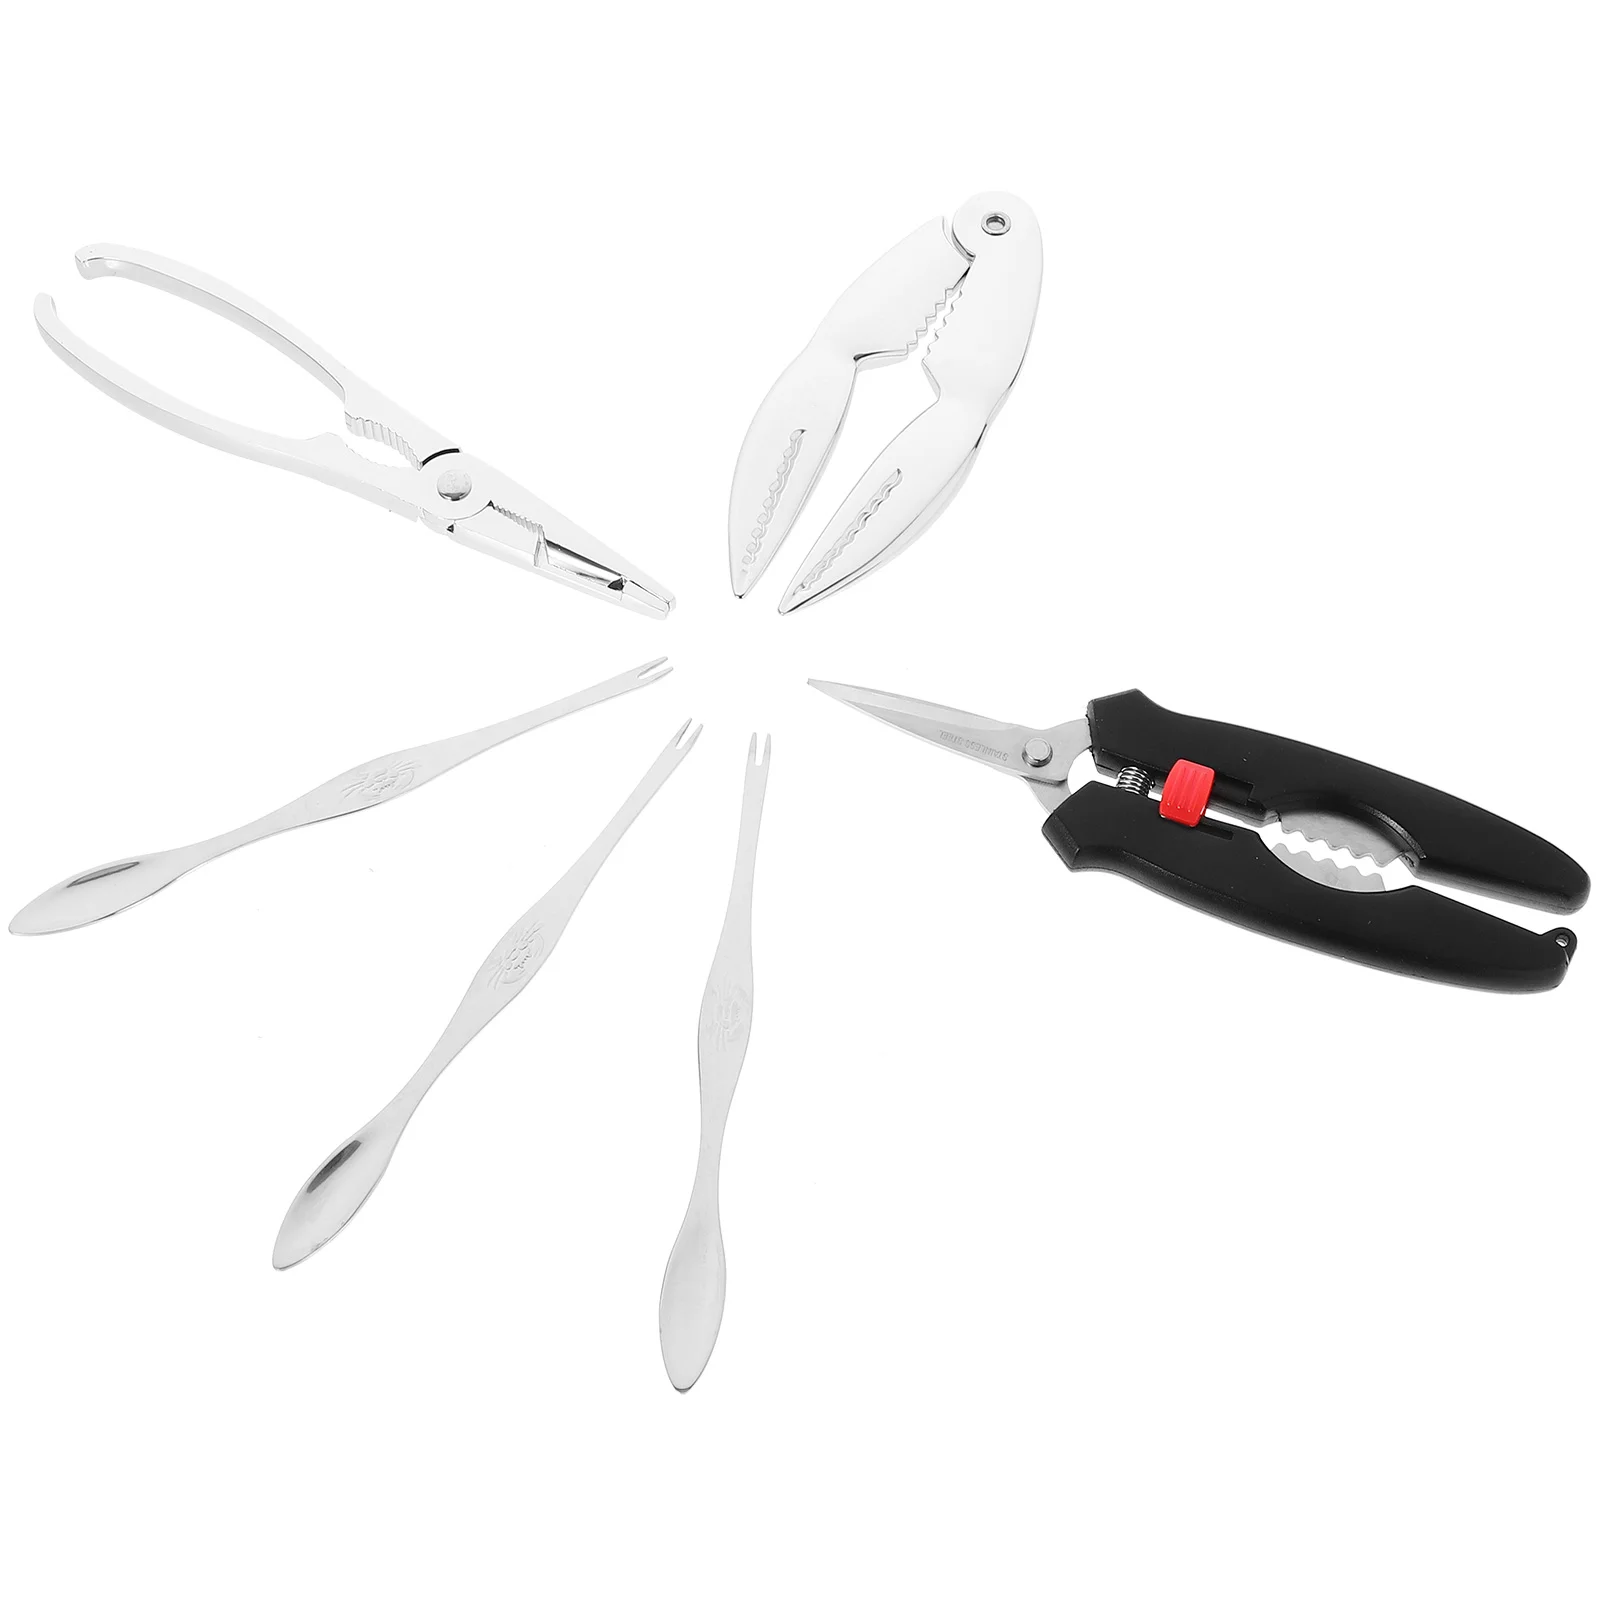 

6pcs Seafood Tools Set Eating Tools Stainless Steel Shears Opening Tools Seafood Crackers Picks Tools Set for Home Restaurant